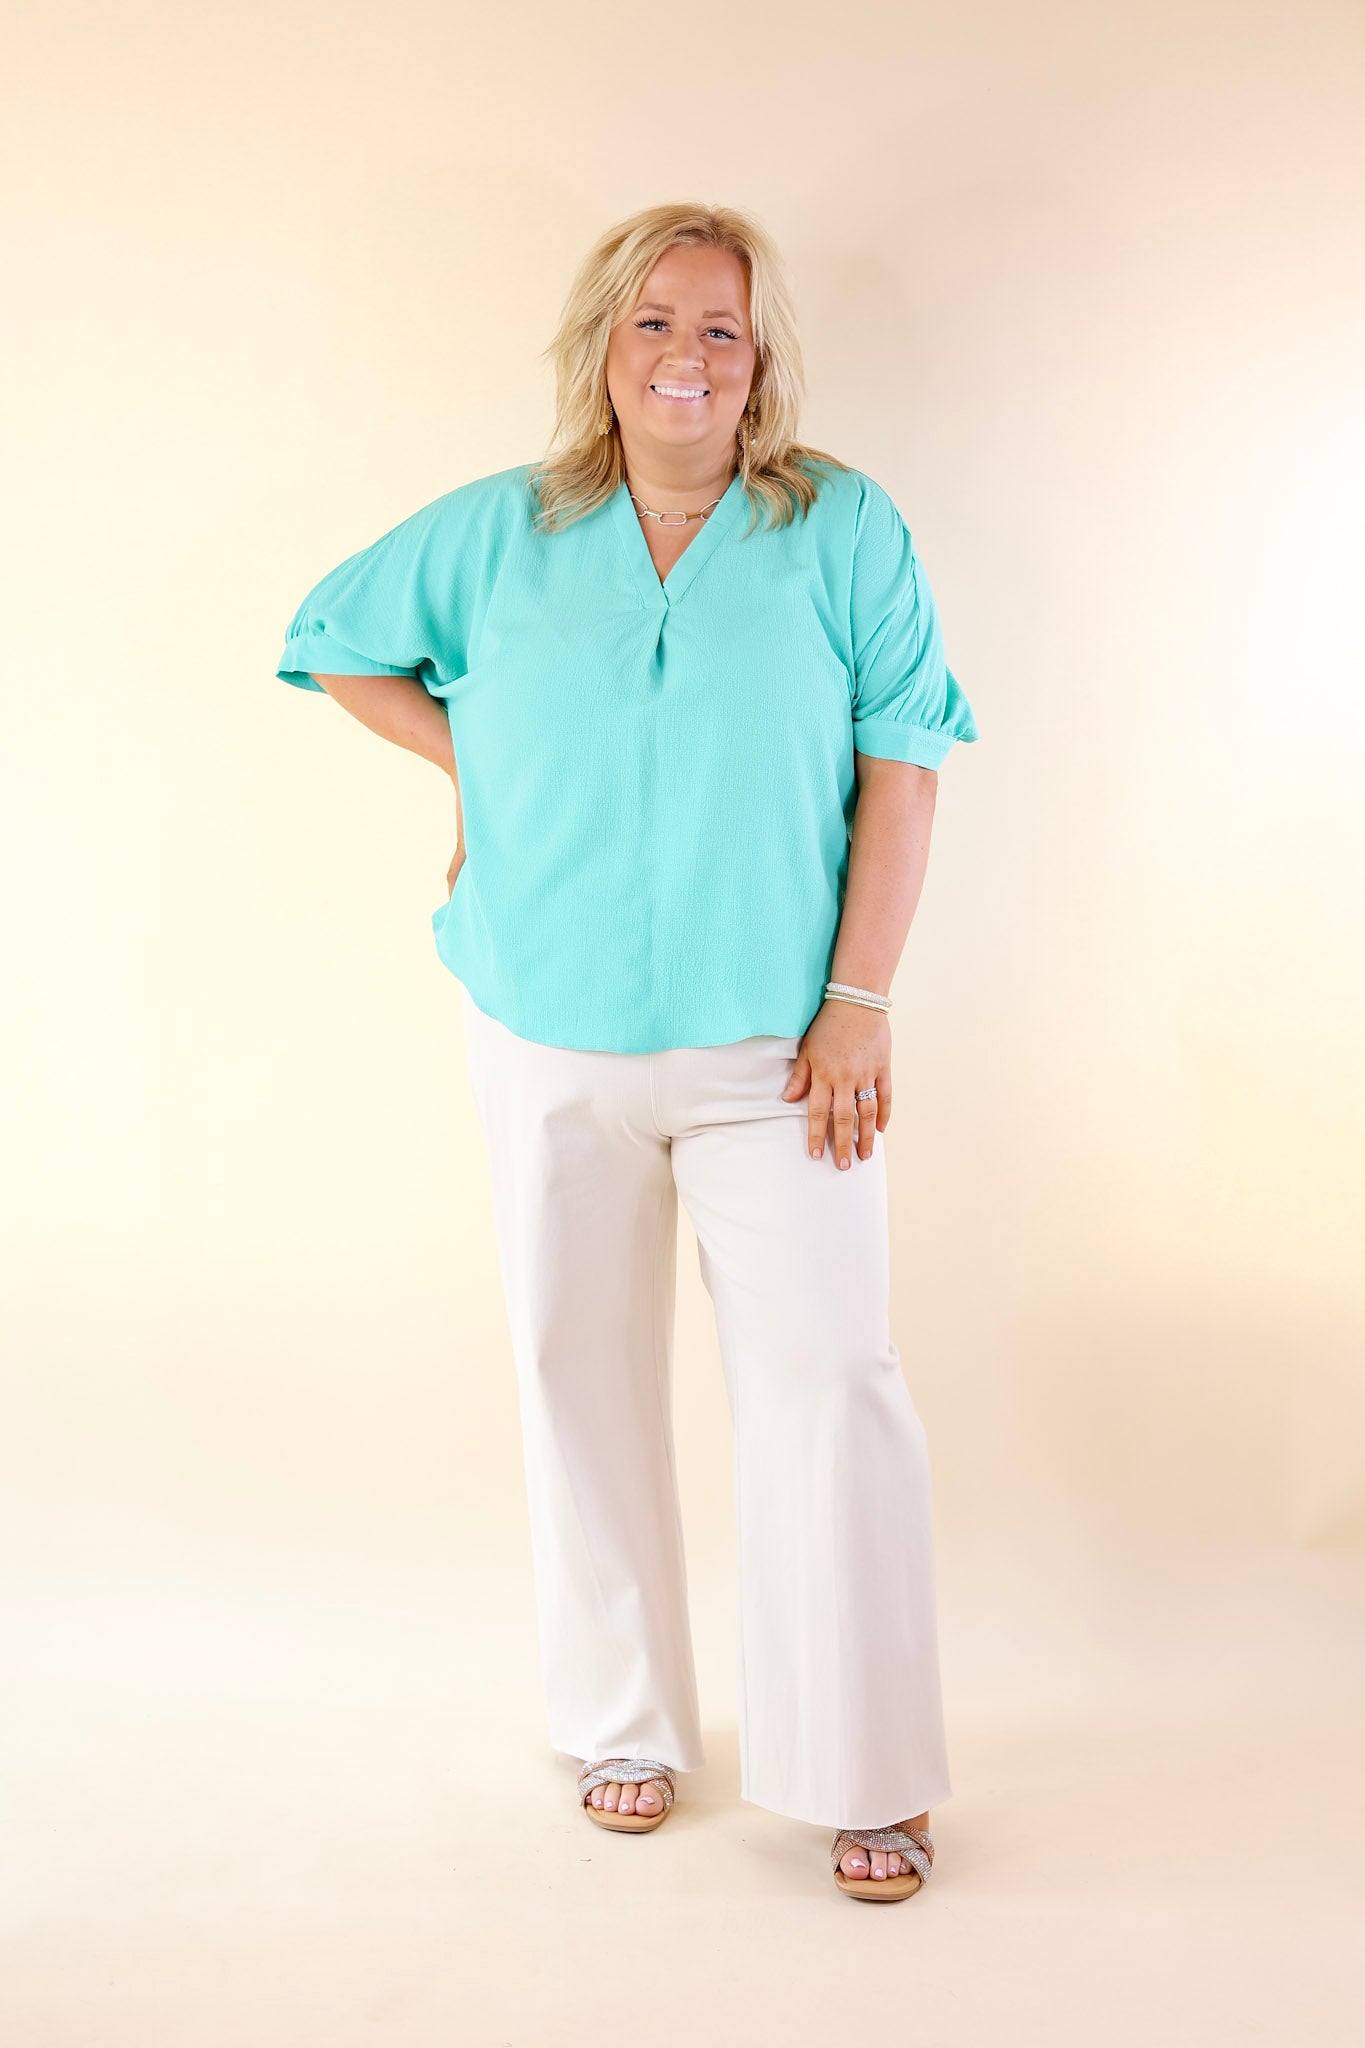 Chic and Charming V Neck Top with 3/4 Sleeves in Emerald Green - Giddy Up Glamour Boutique